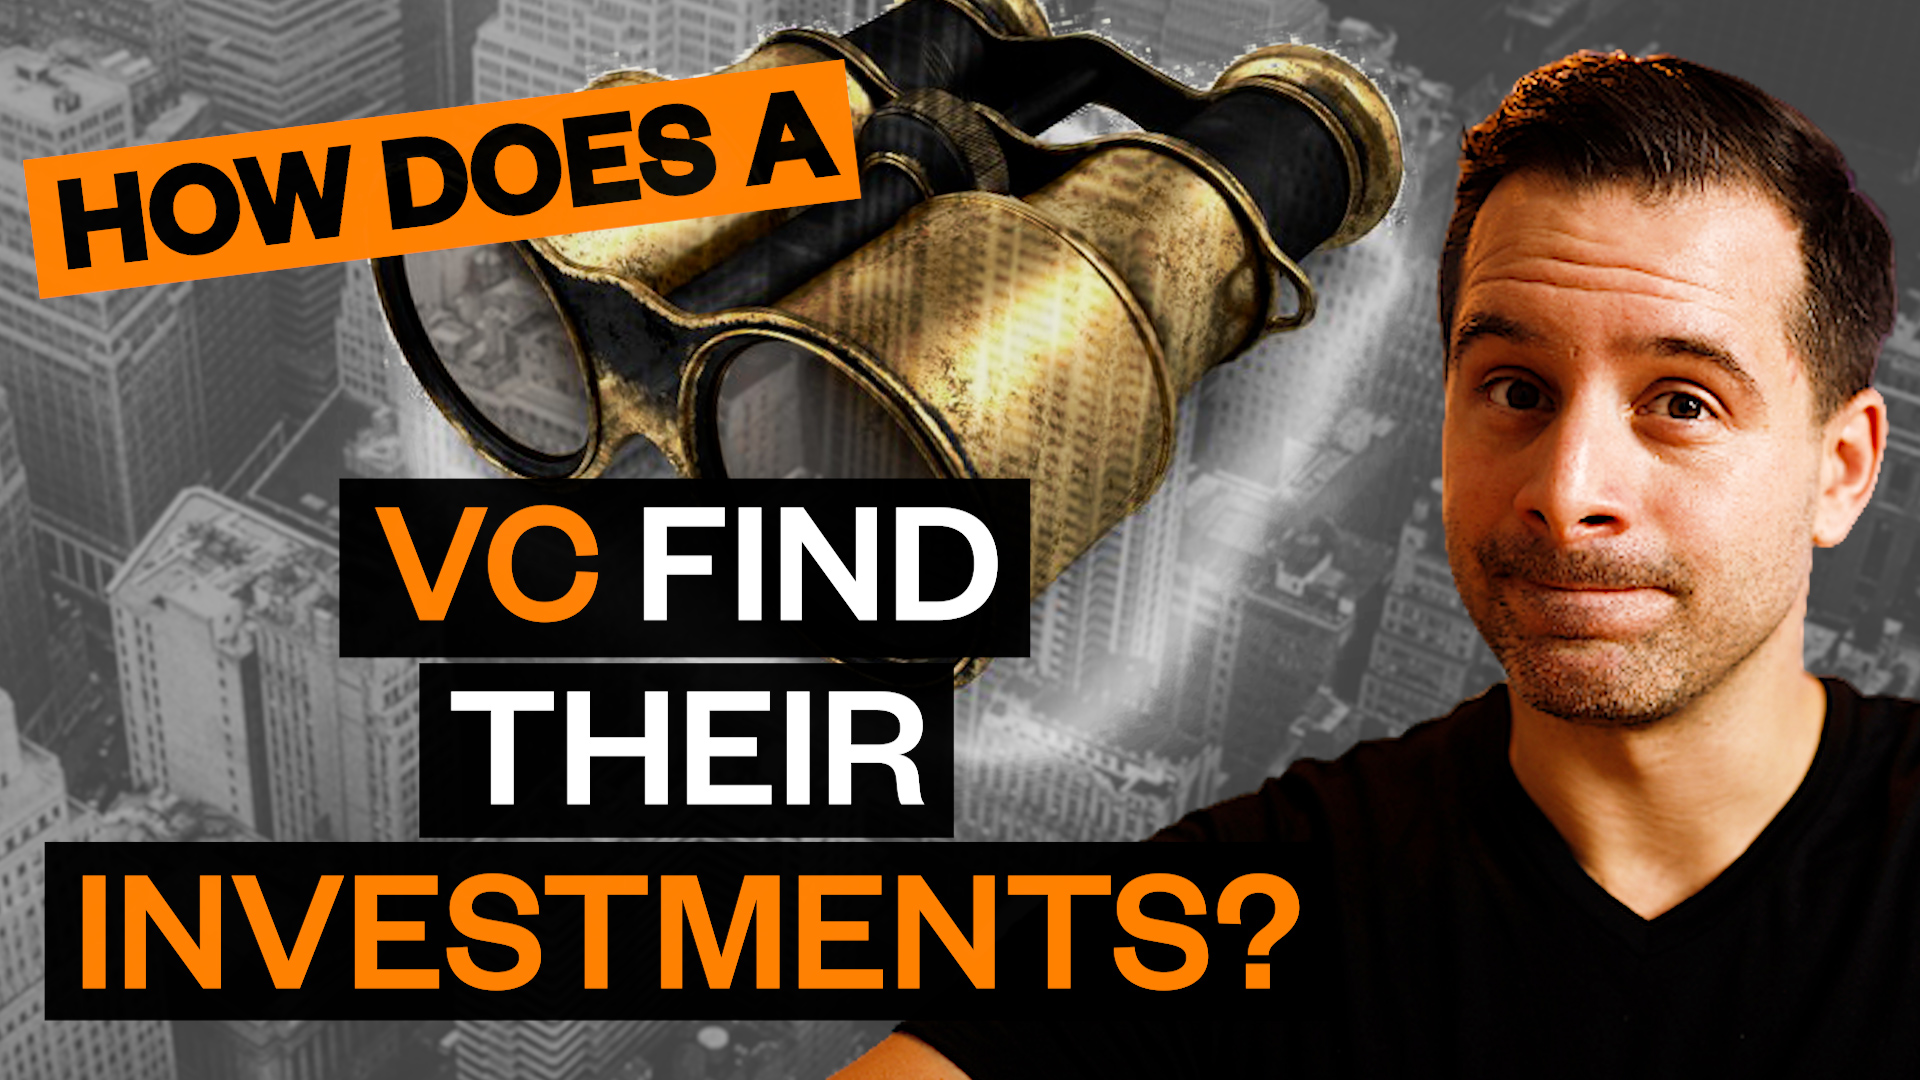 How Does a VC Find Their Investments